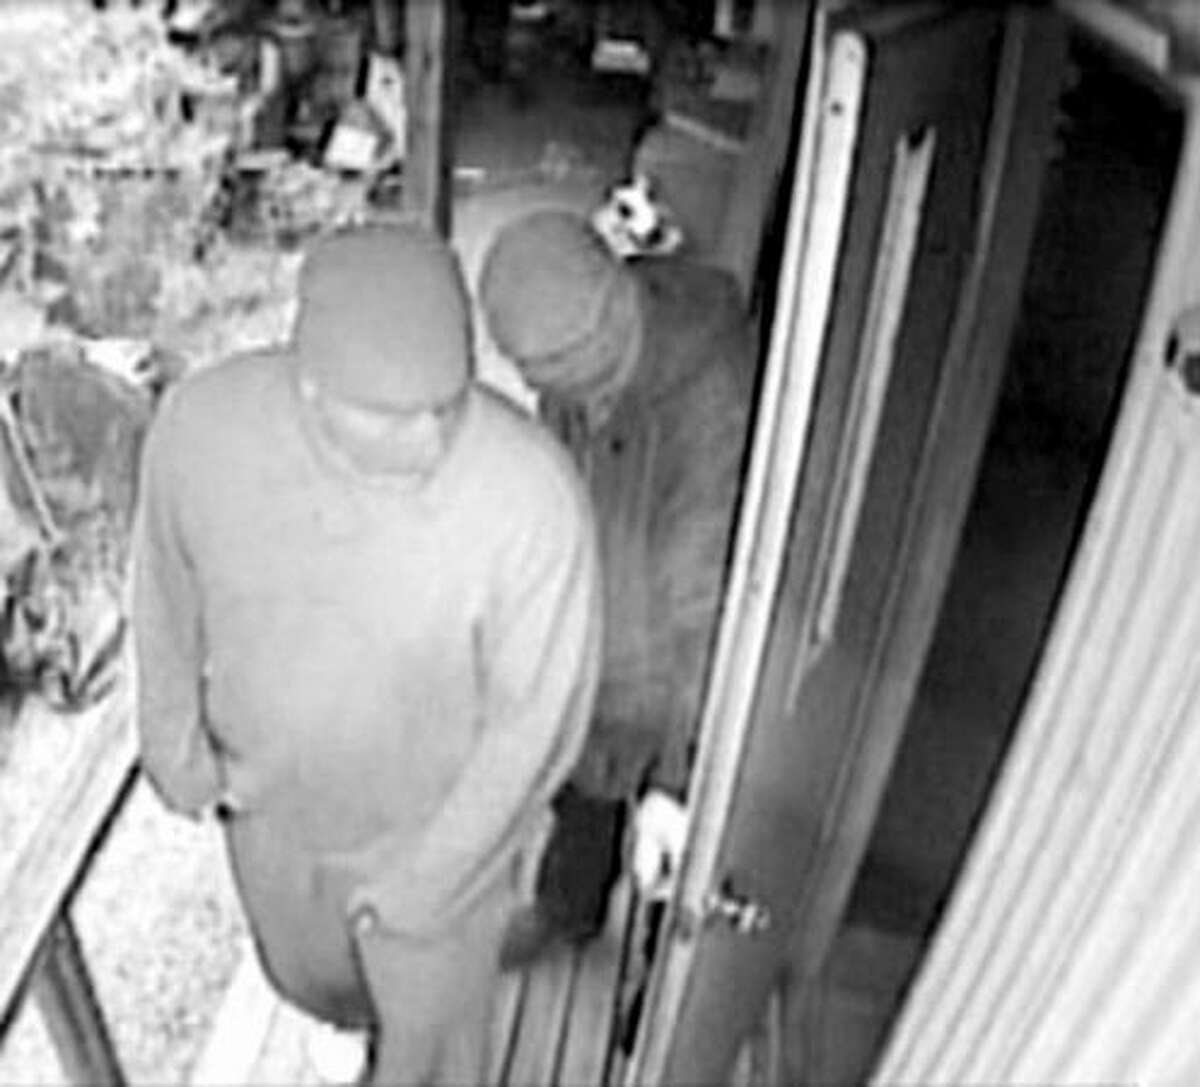 A surveillance image from an August 19 Vashon Island home-invasion robbery in the 9400 block of Southwest Gorsuch Road. Read more about the robbery here.